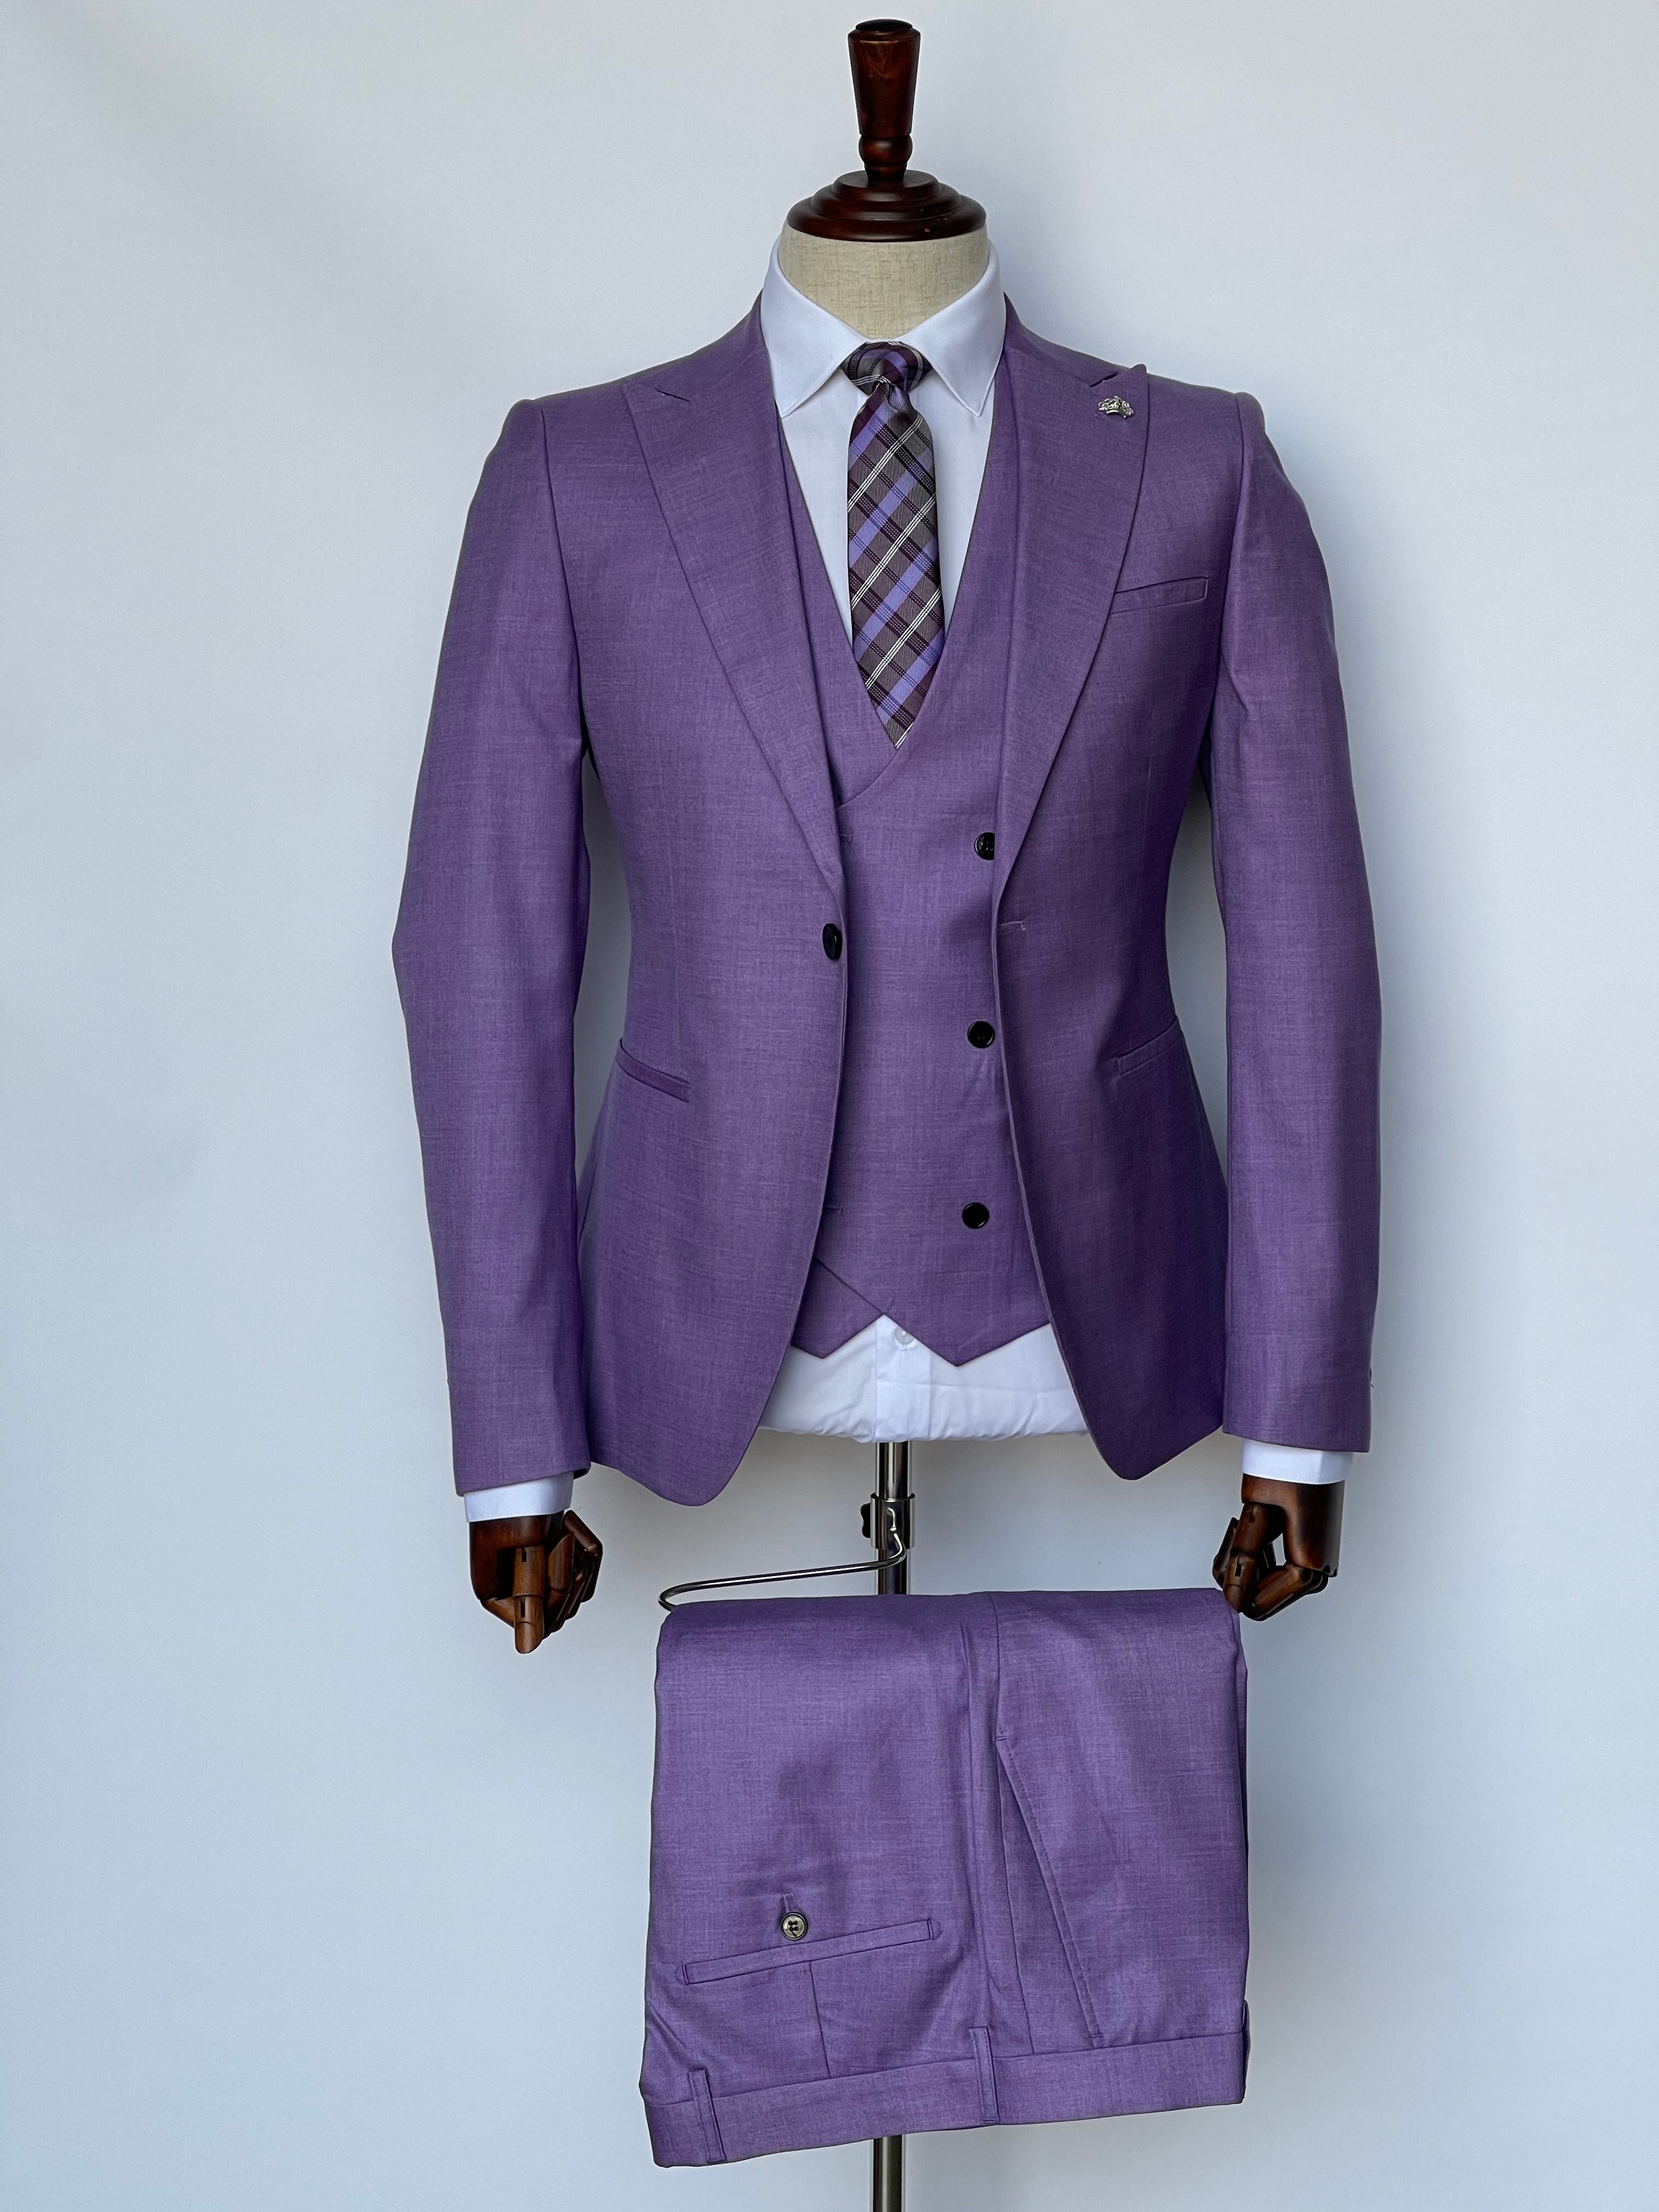 Giovanni Testi Suits With Double Breasted Vest - 3 Pieces  Peak Lapel  in Purple